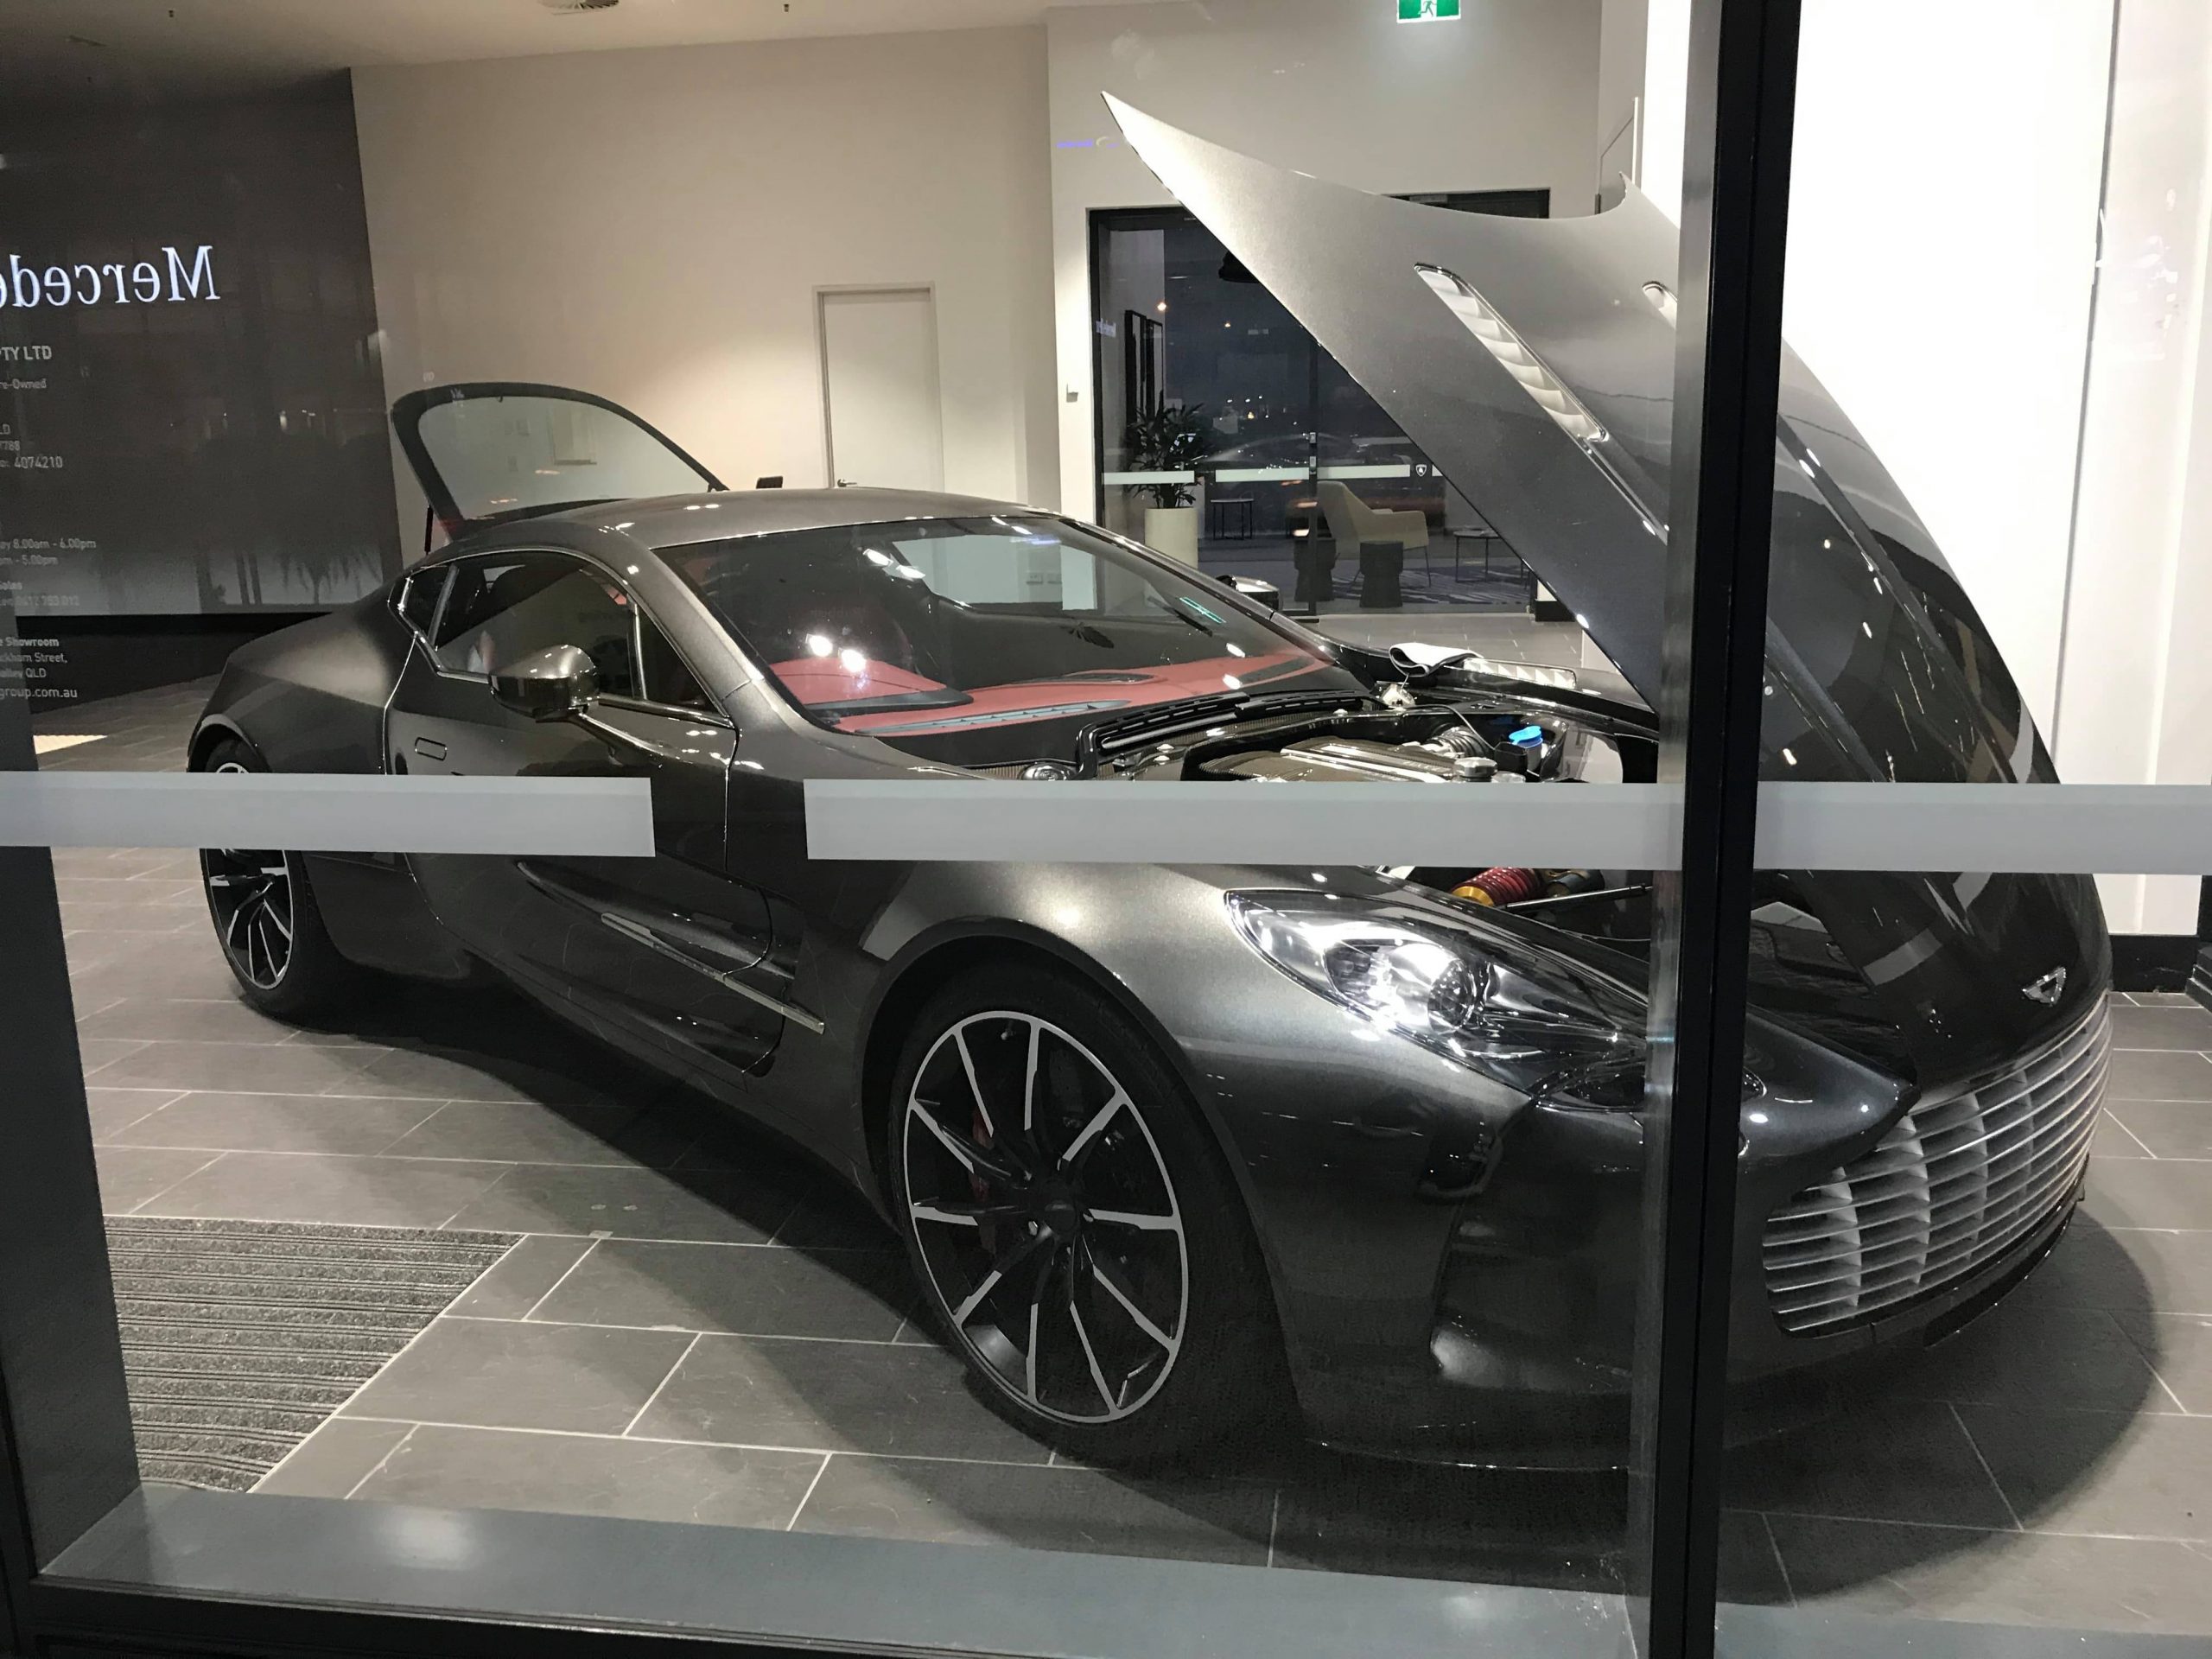 Was taking a walk through Brisbane AU, Happened to find this Aston Martin One 77 at a dealership with only 77 built with only one in Australia that I am aware of. Absolutely crazy chances and a beautiful car!